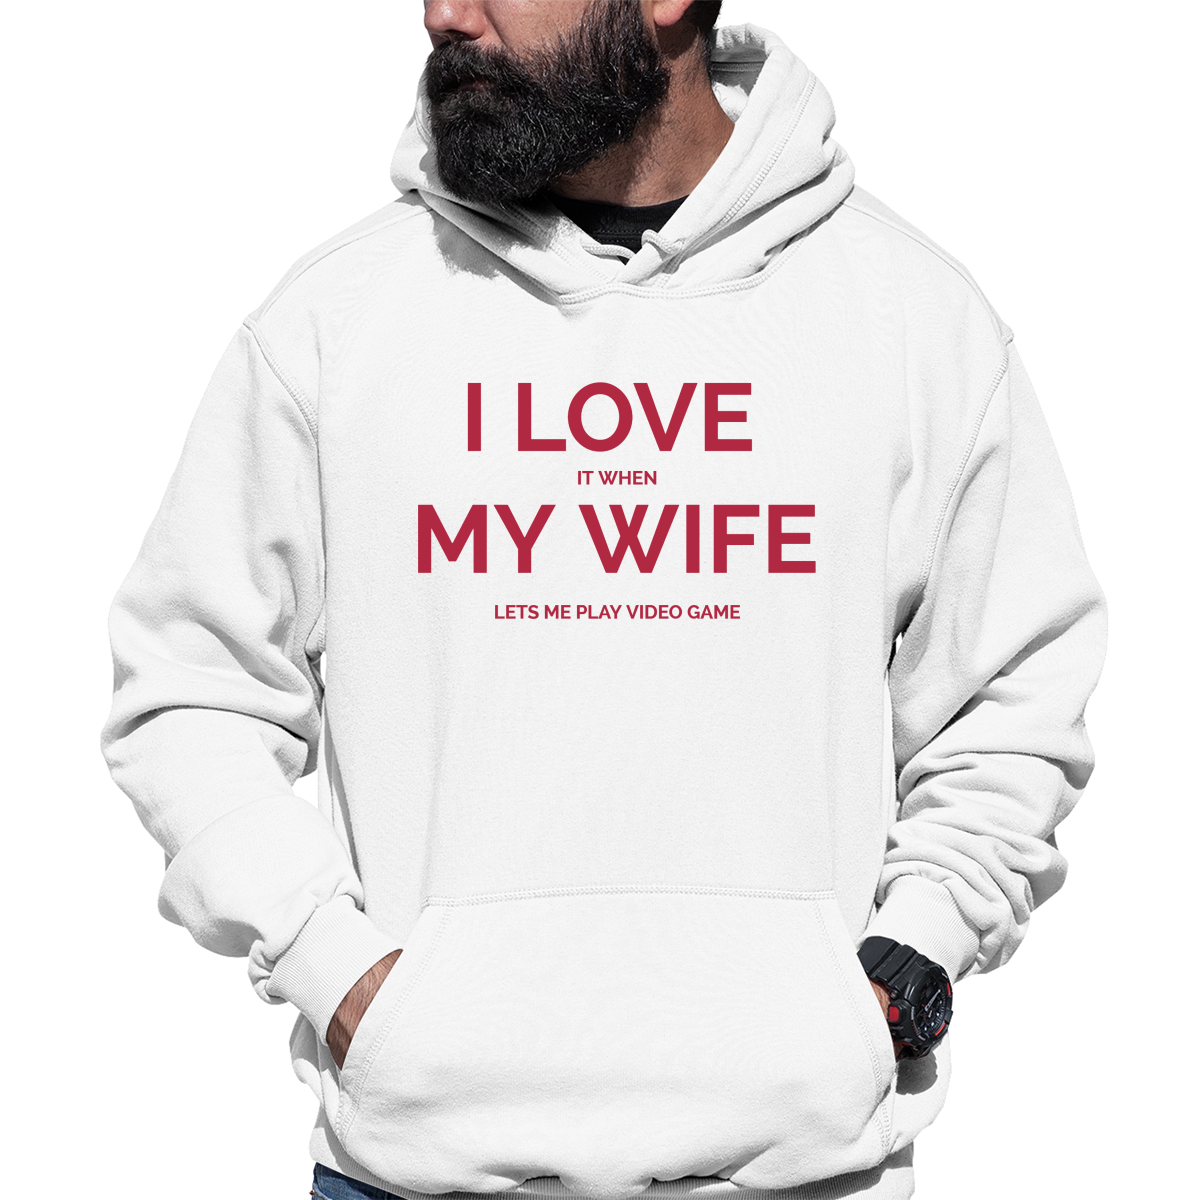 I Love it When My Wife Lets Me Play Video Games Unisex Hoodie | White